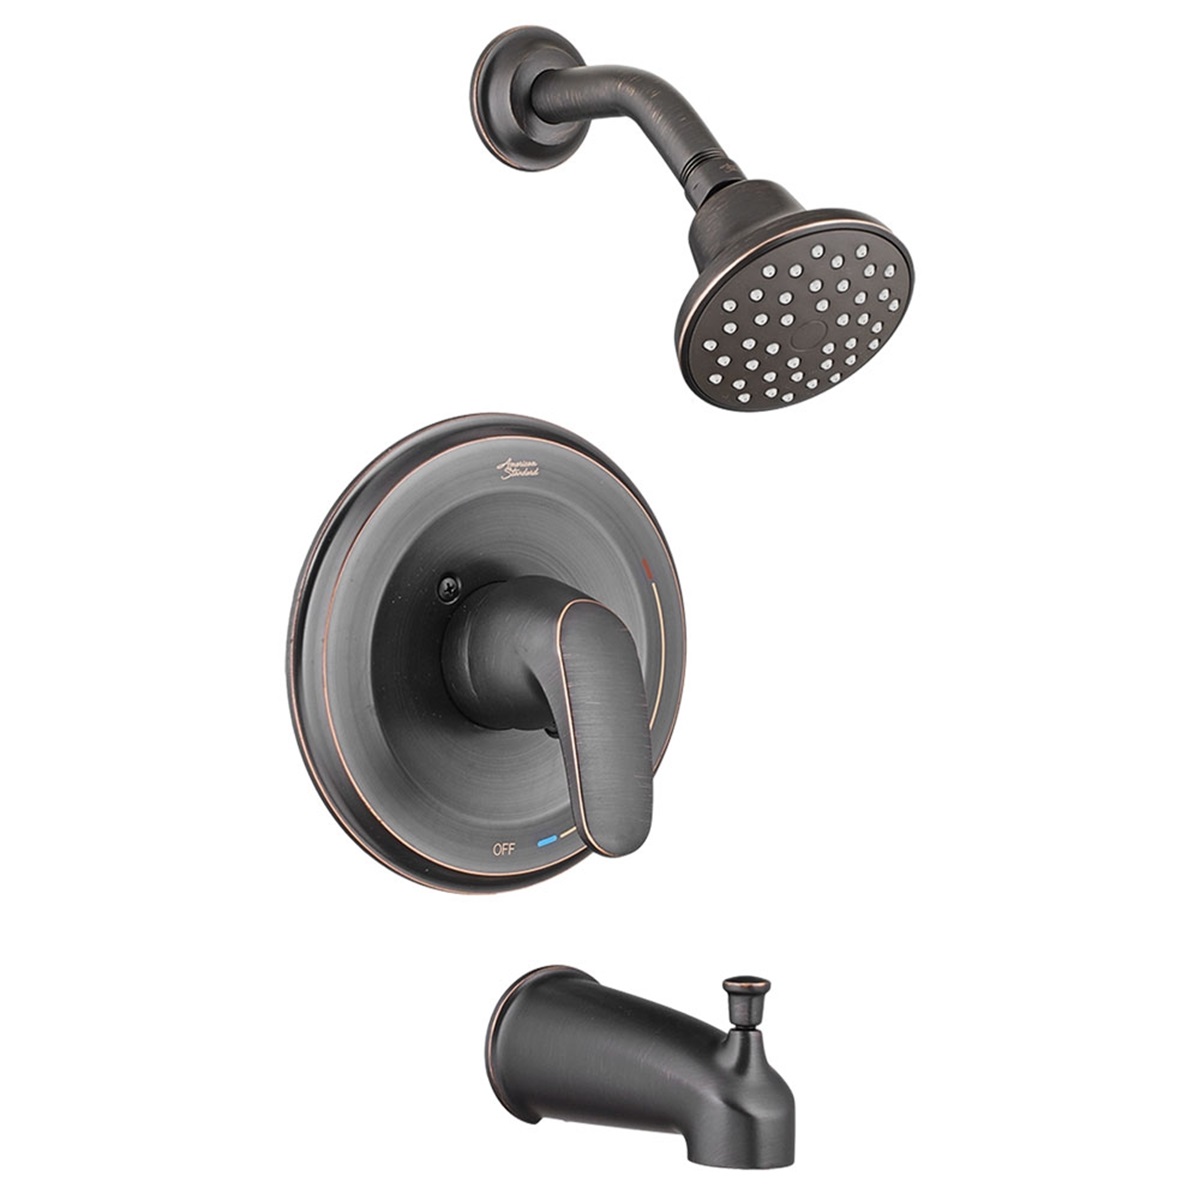 T075.507.278 COLONY PRO SHOWER ONLY TRIM LEGACY BRONZE